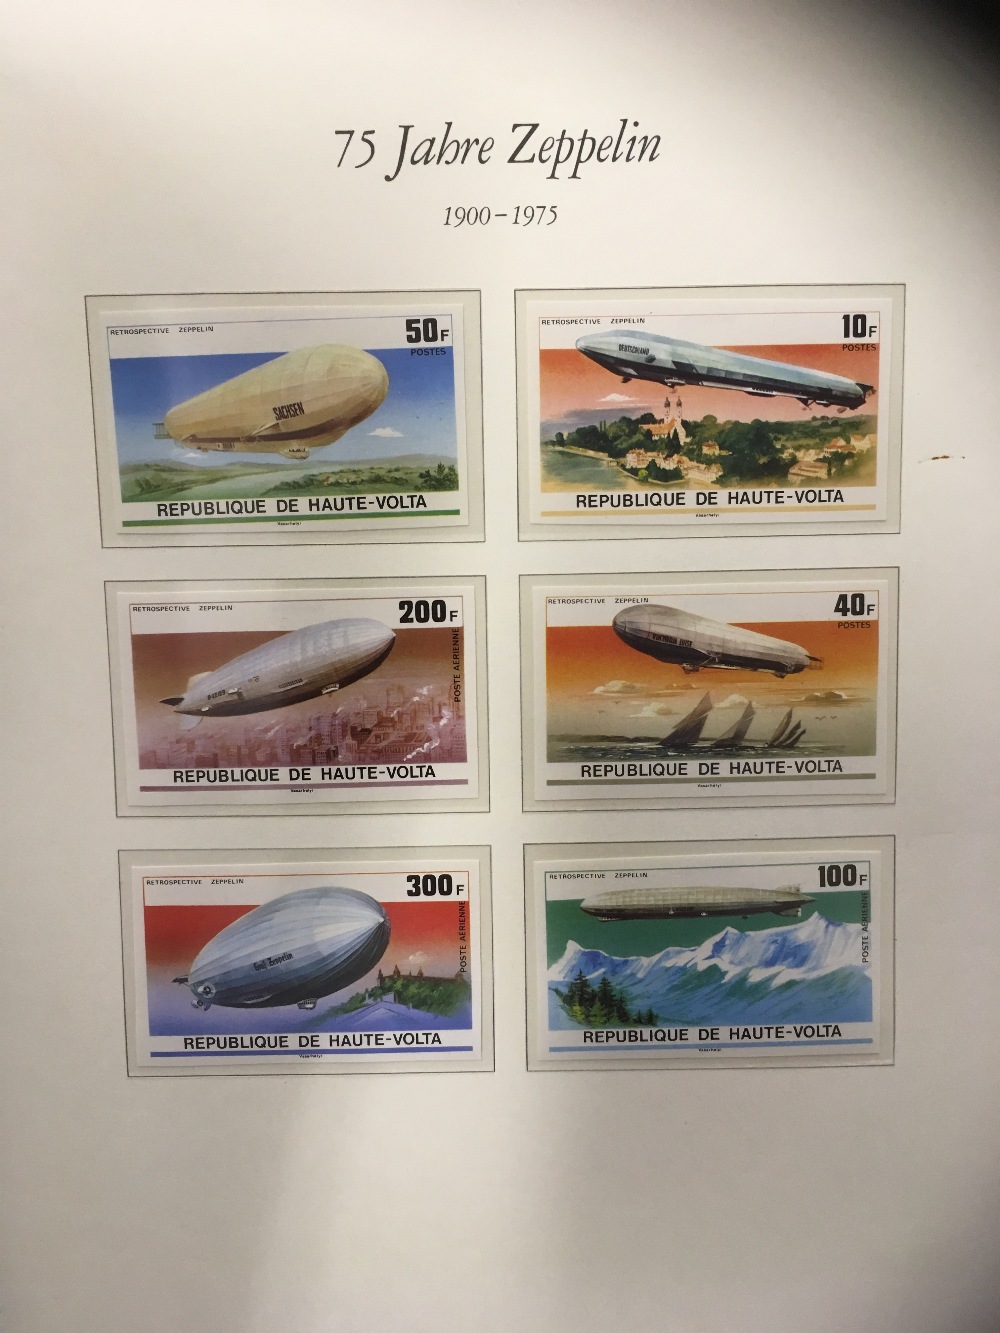 STAMPS : 75th Anniversary of Graf Zeppelin in four special albums, pages written up in German text.